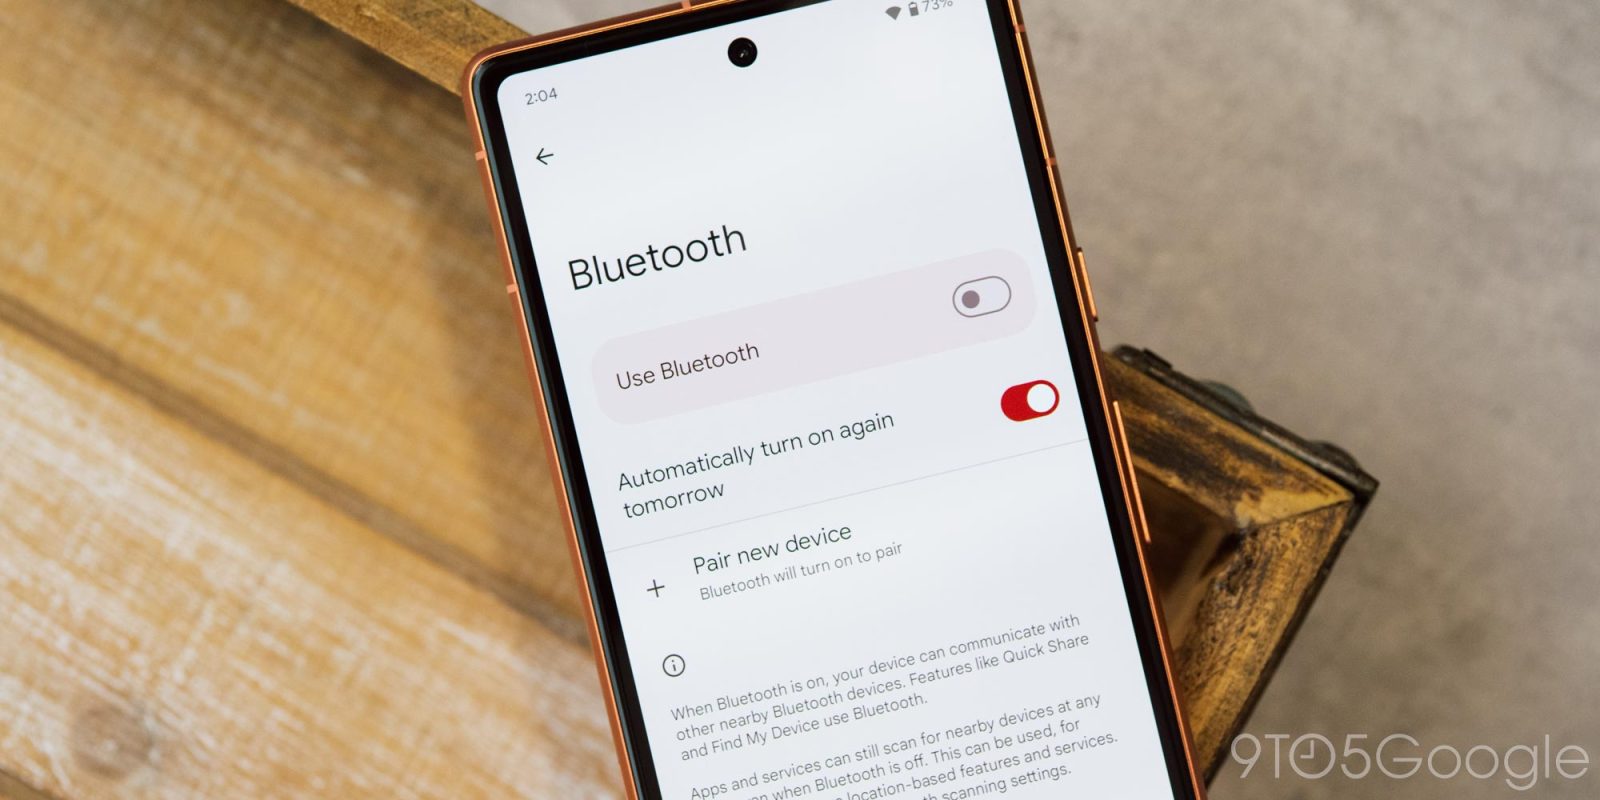 Android 15 Beta 2 will now automatically turn Bluetooth back on ‘tomorrow morning’